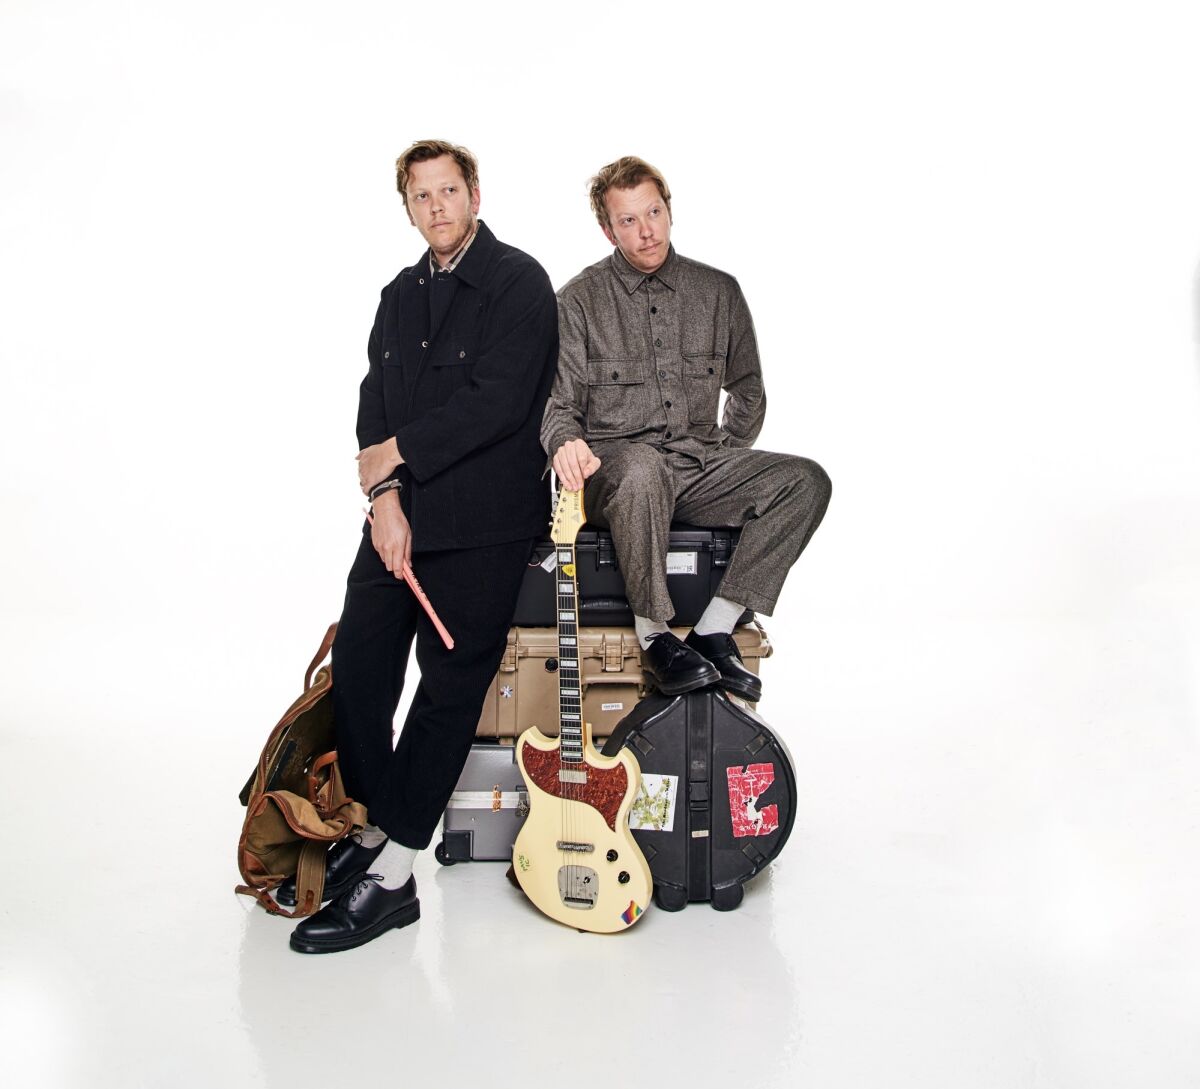 The Mattson 2 teams identical twin brothers Jared (left) and Jonathan Mattson. The two first teamed up in their mid-teens and have been making music together ever since, as well as earning multiple college degrees.